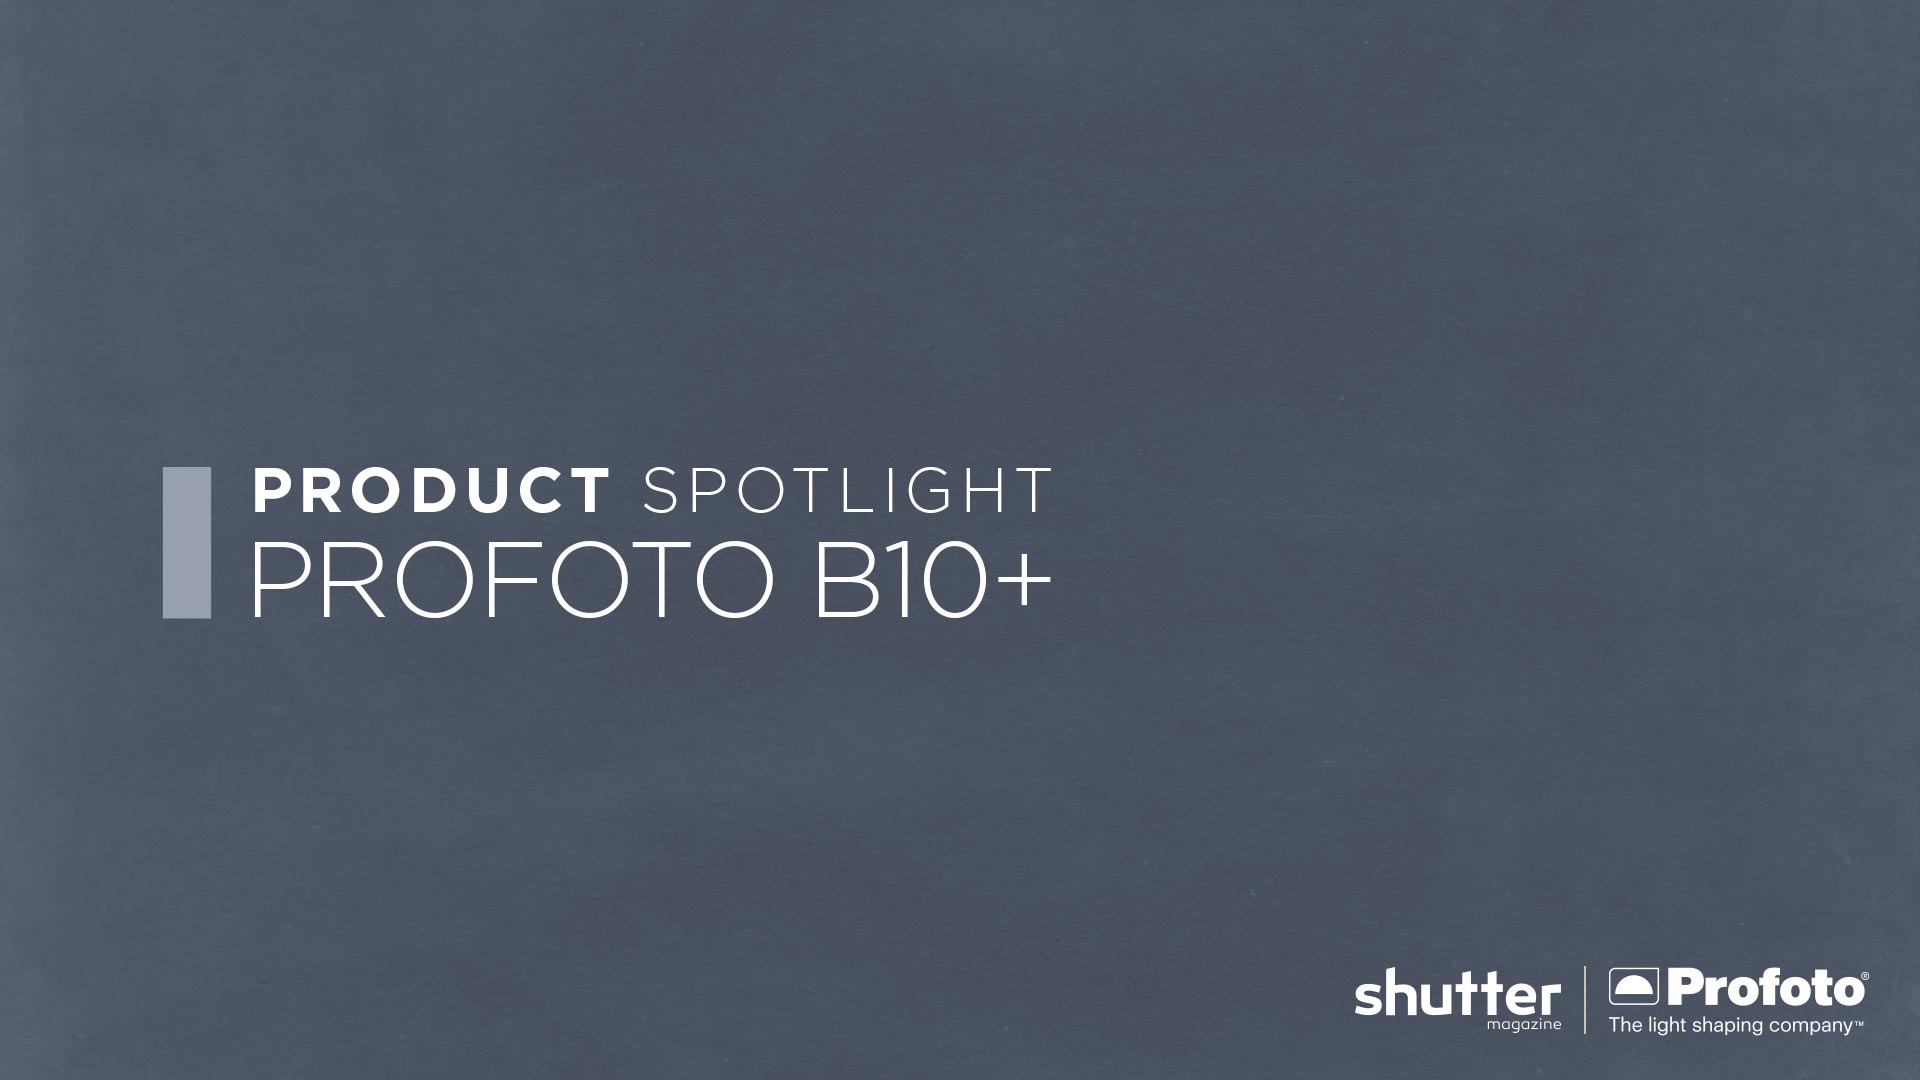 Read more about the article Product Spotlight with the Profoto B10+